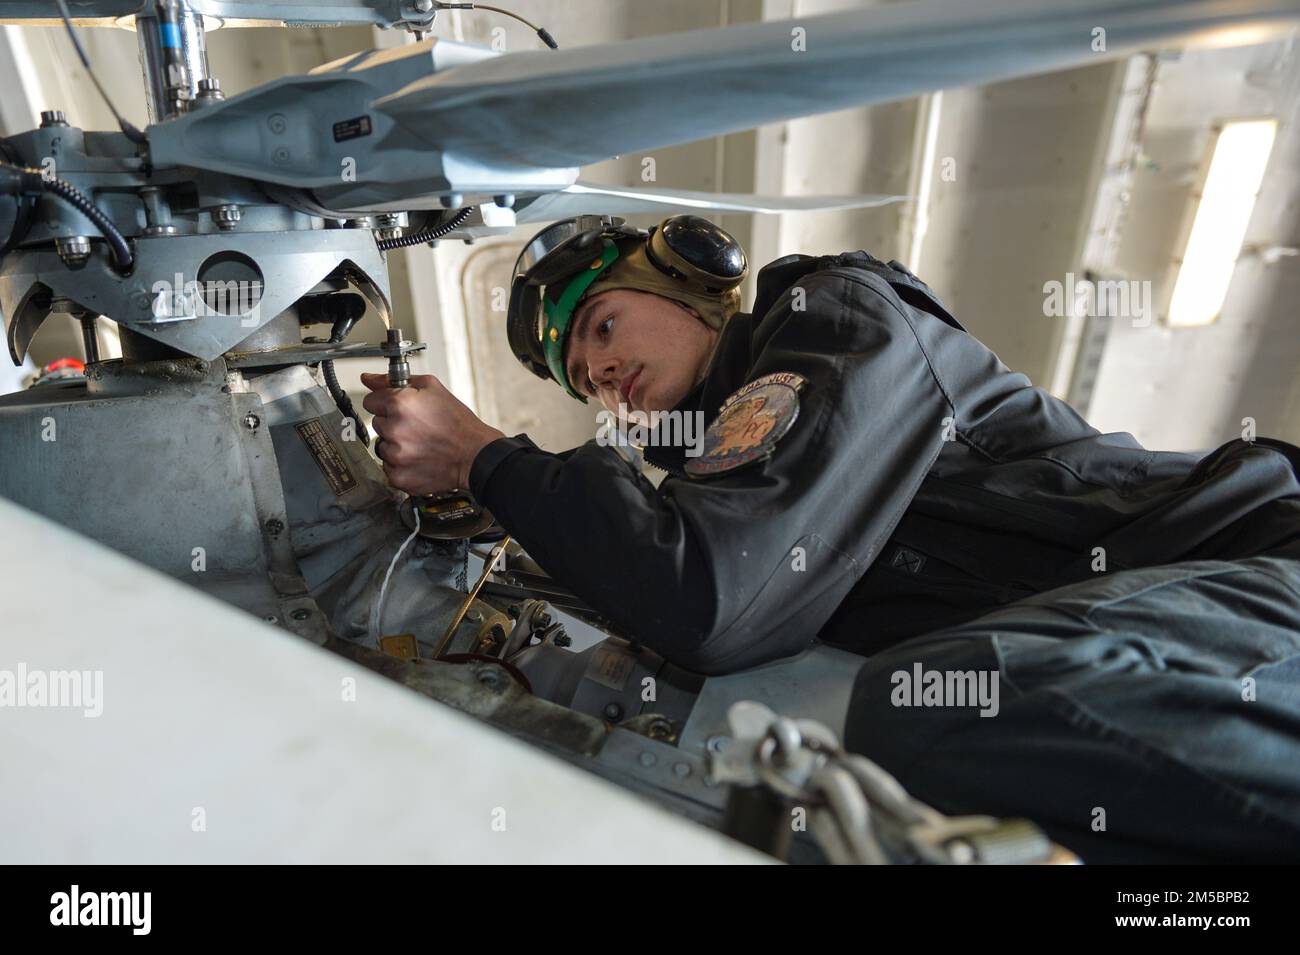 220224-N-GP384-1059 ADRIATIC SEA (Feb. 24, 2022) Aviation Electrician’s Mate 2nd Class William Lockwood, from Jacksonville, Florida, assigned to the 'Proud Warriors' of Helicopter Maritime Strike Squadron (HSM) 72, examines a cable for corrosion on an MH-60R Sea Hawk helicopter in the hangar bay of the Nimitz-class aircraft carrier USS Harry S. Truman (CVN 75), Feb. 24, 2022. The Harry S. Truman Carrier Strike Group is on a scheduled deployment in the U.S. Sixth Fleet area of operations in support of U.S., allied and partner interests in Europe and Africa. Stock Photo